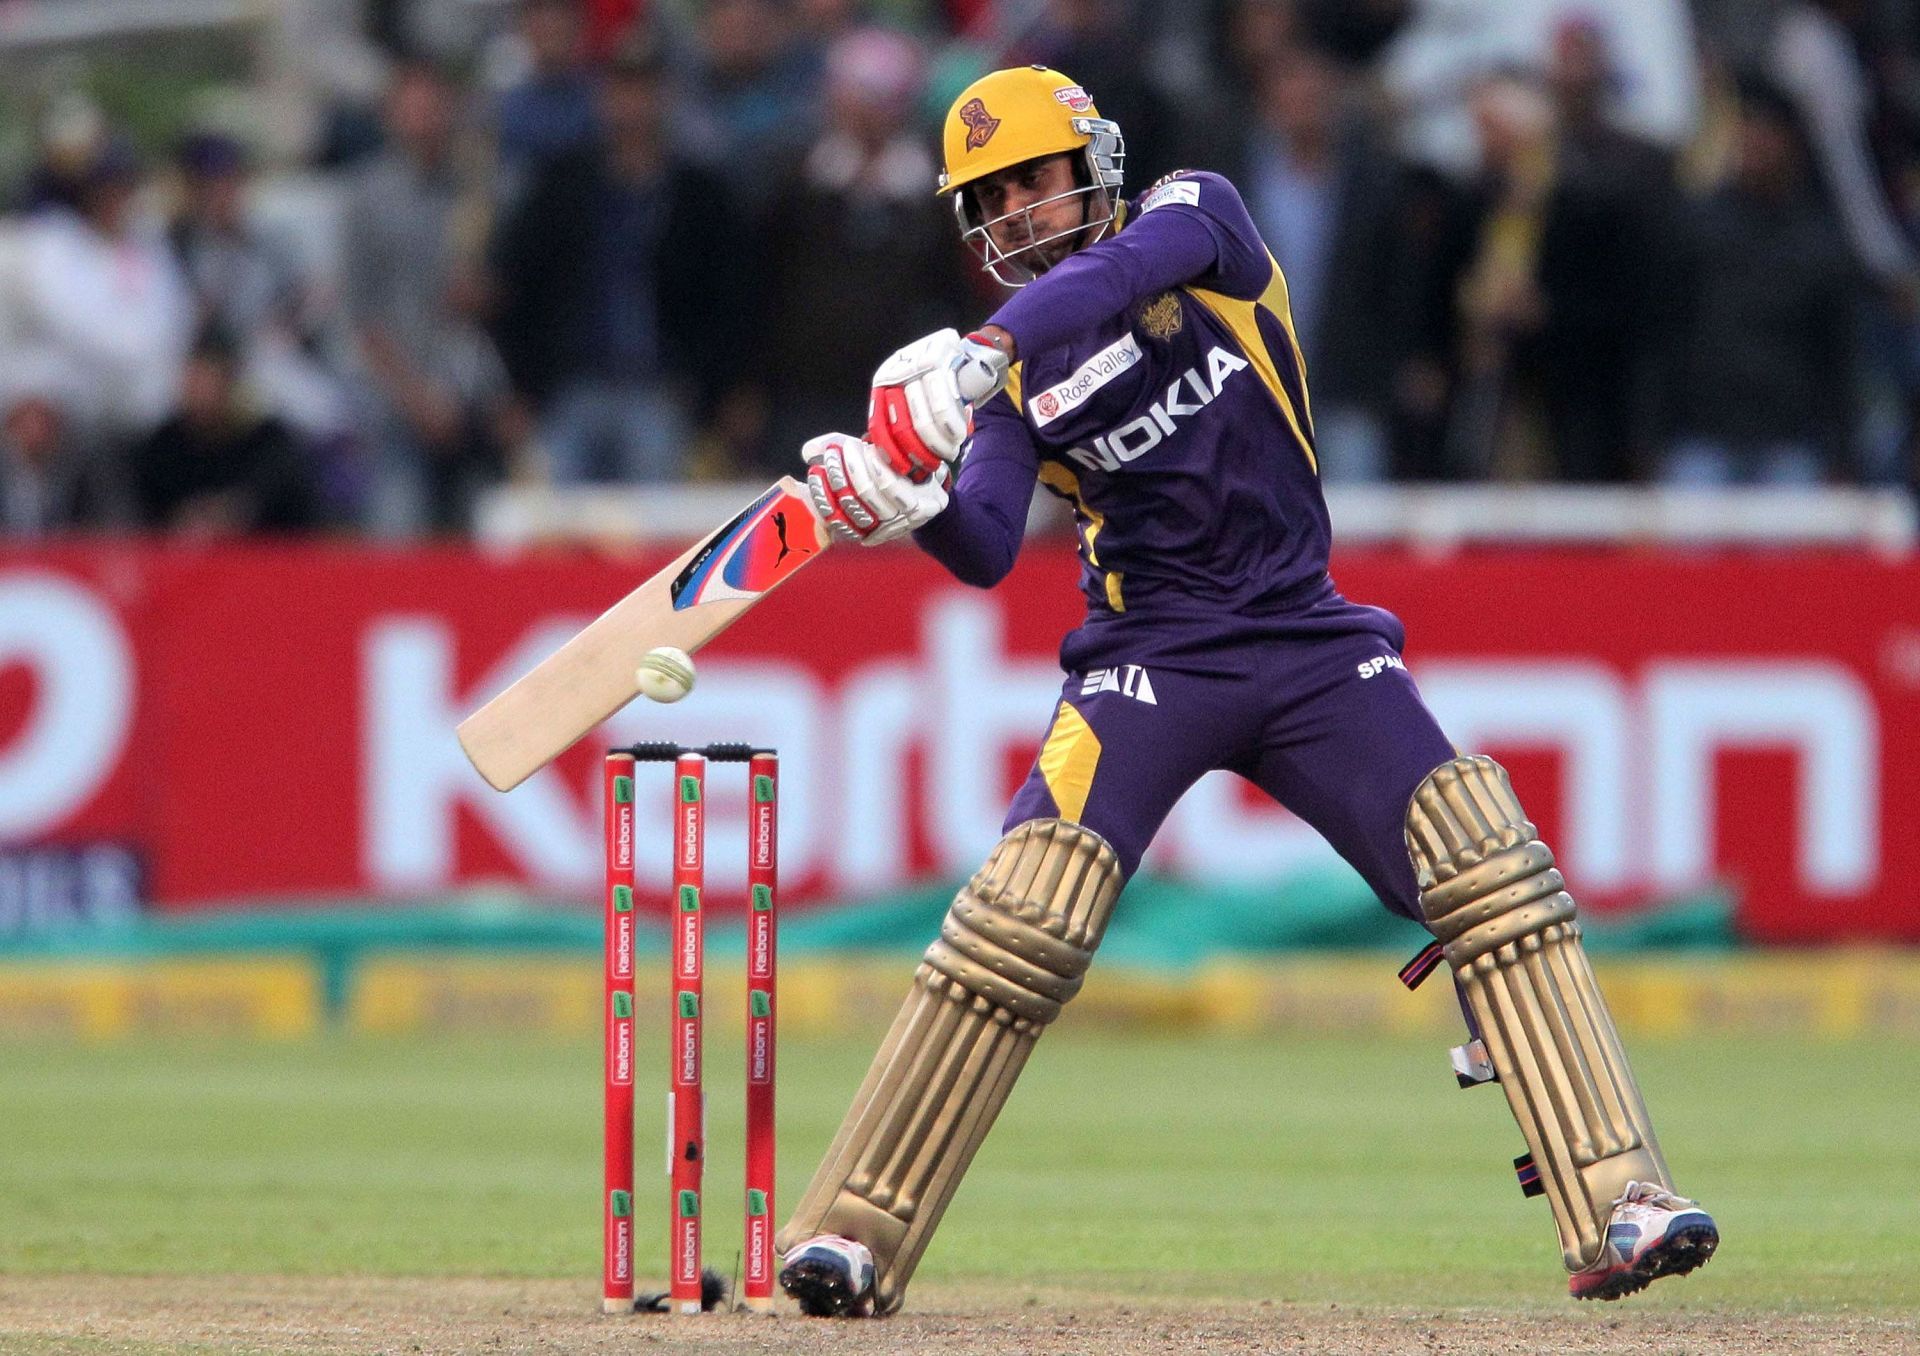 Manoj Tiwary in action for Kolkata Knight Riders (Image Credit: Getty Images)